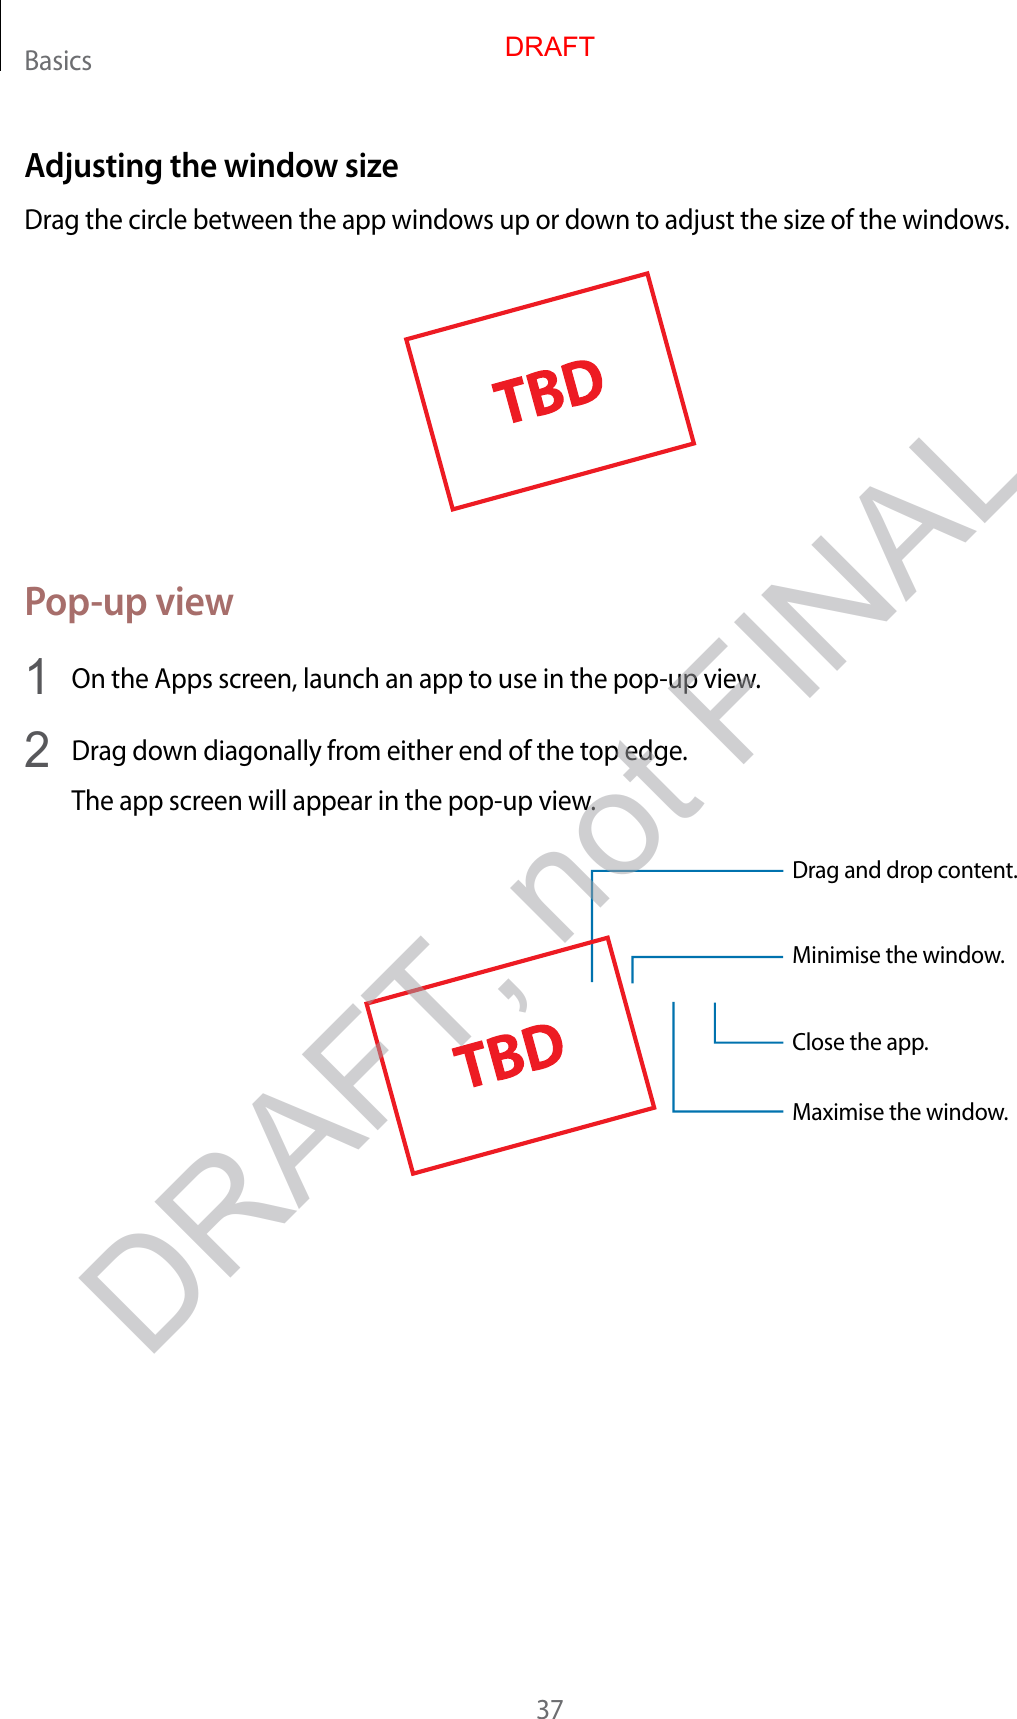 Basics37Adjusting the windo w siz eDrag the circle between the app windo w s up or down t o adjust the siz e of the window s .Pop-up view1  On the Apps screen, launch an app t o use in the pop-up view.2  Drag down diagonally fr om either end of the t op edge .The app screen will appear in the pop-up view.Minimise the window.Close the app .Maximise the window.Drag and drop c ont ent.DRAFTDRAFT, not FINAL